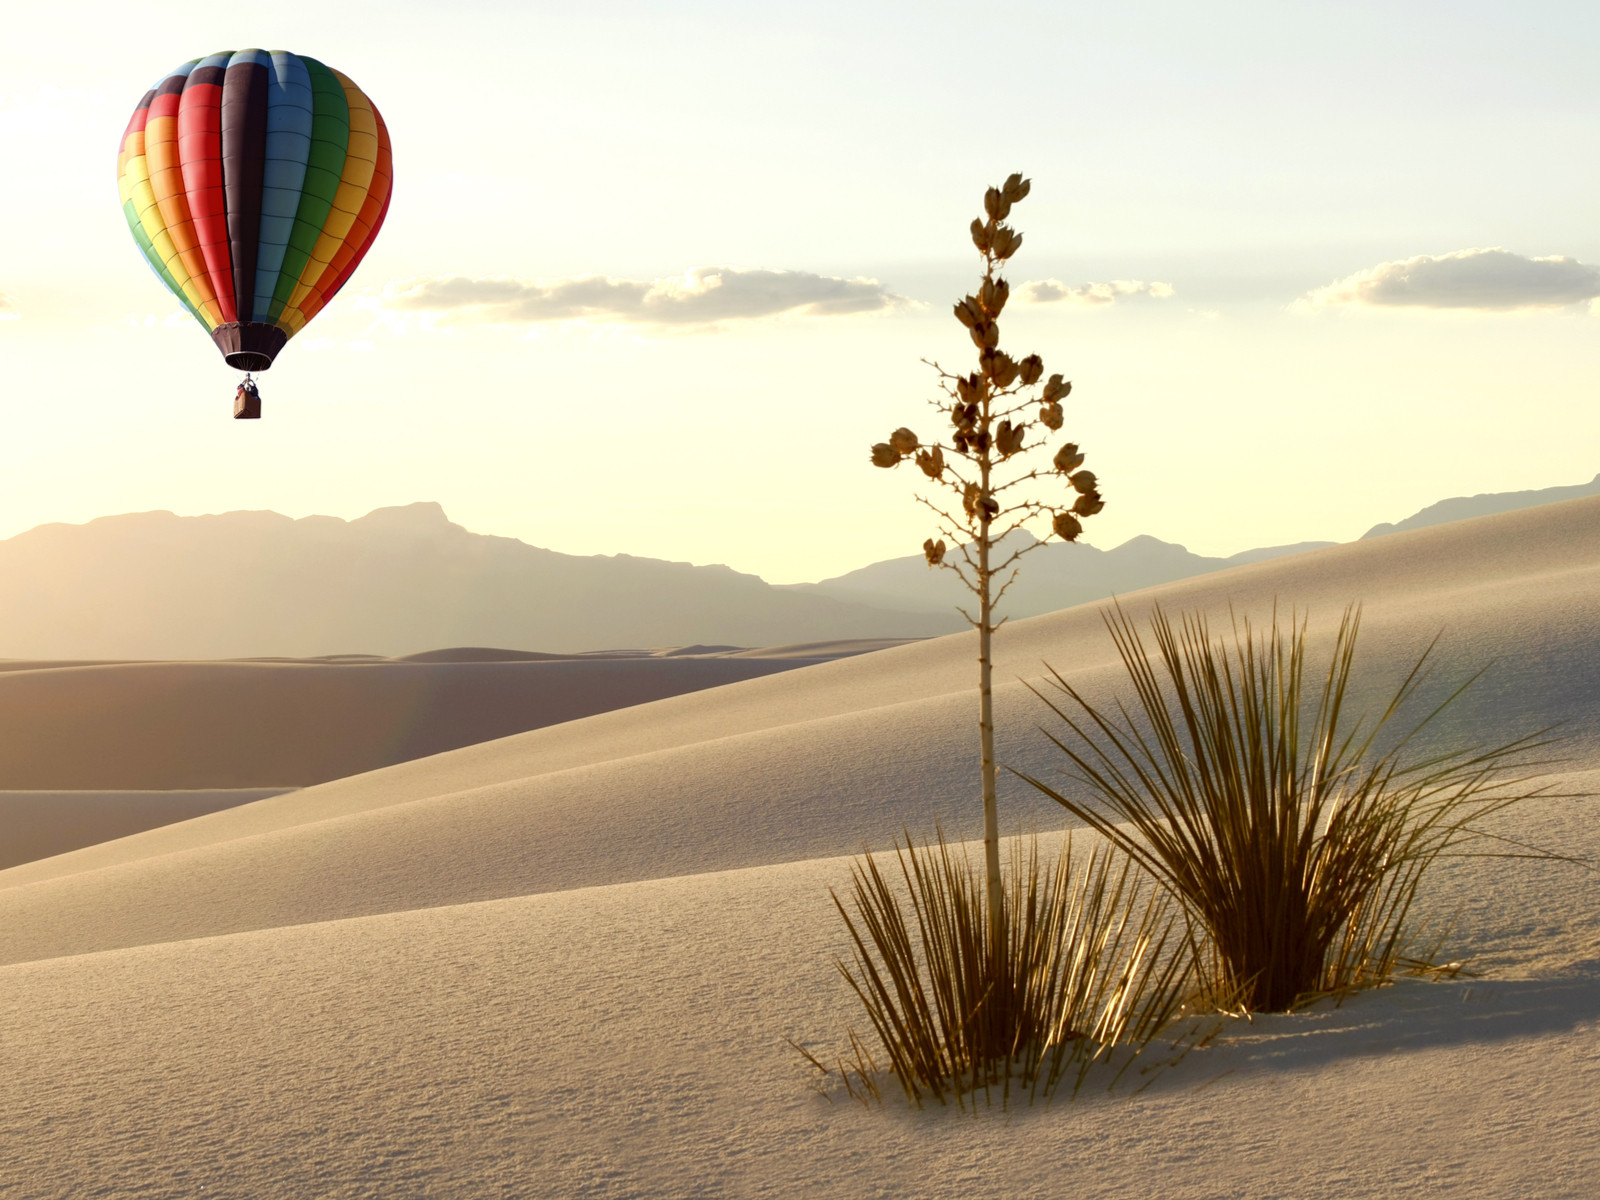 Pictured during the worst time to visit New Mexico, the Summer, a hot air balloon is pictured over the white sands